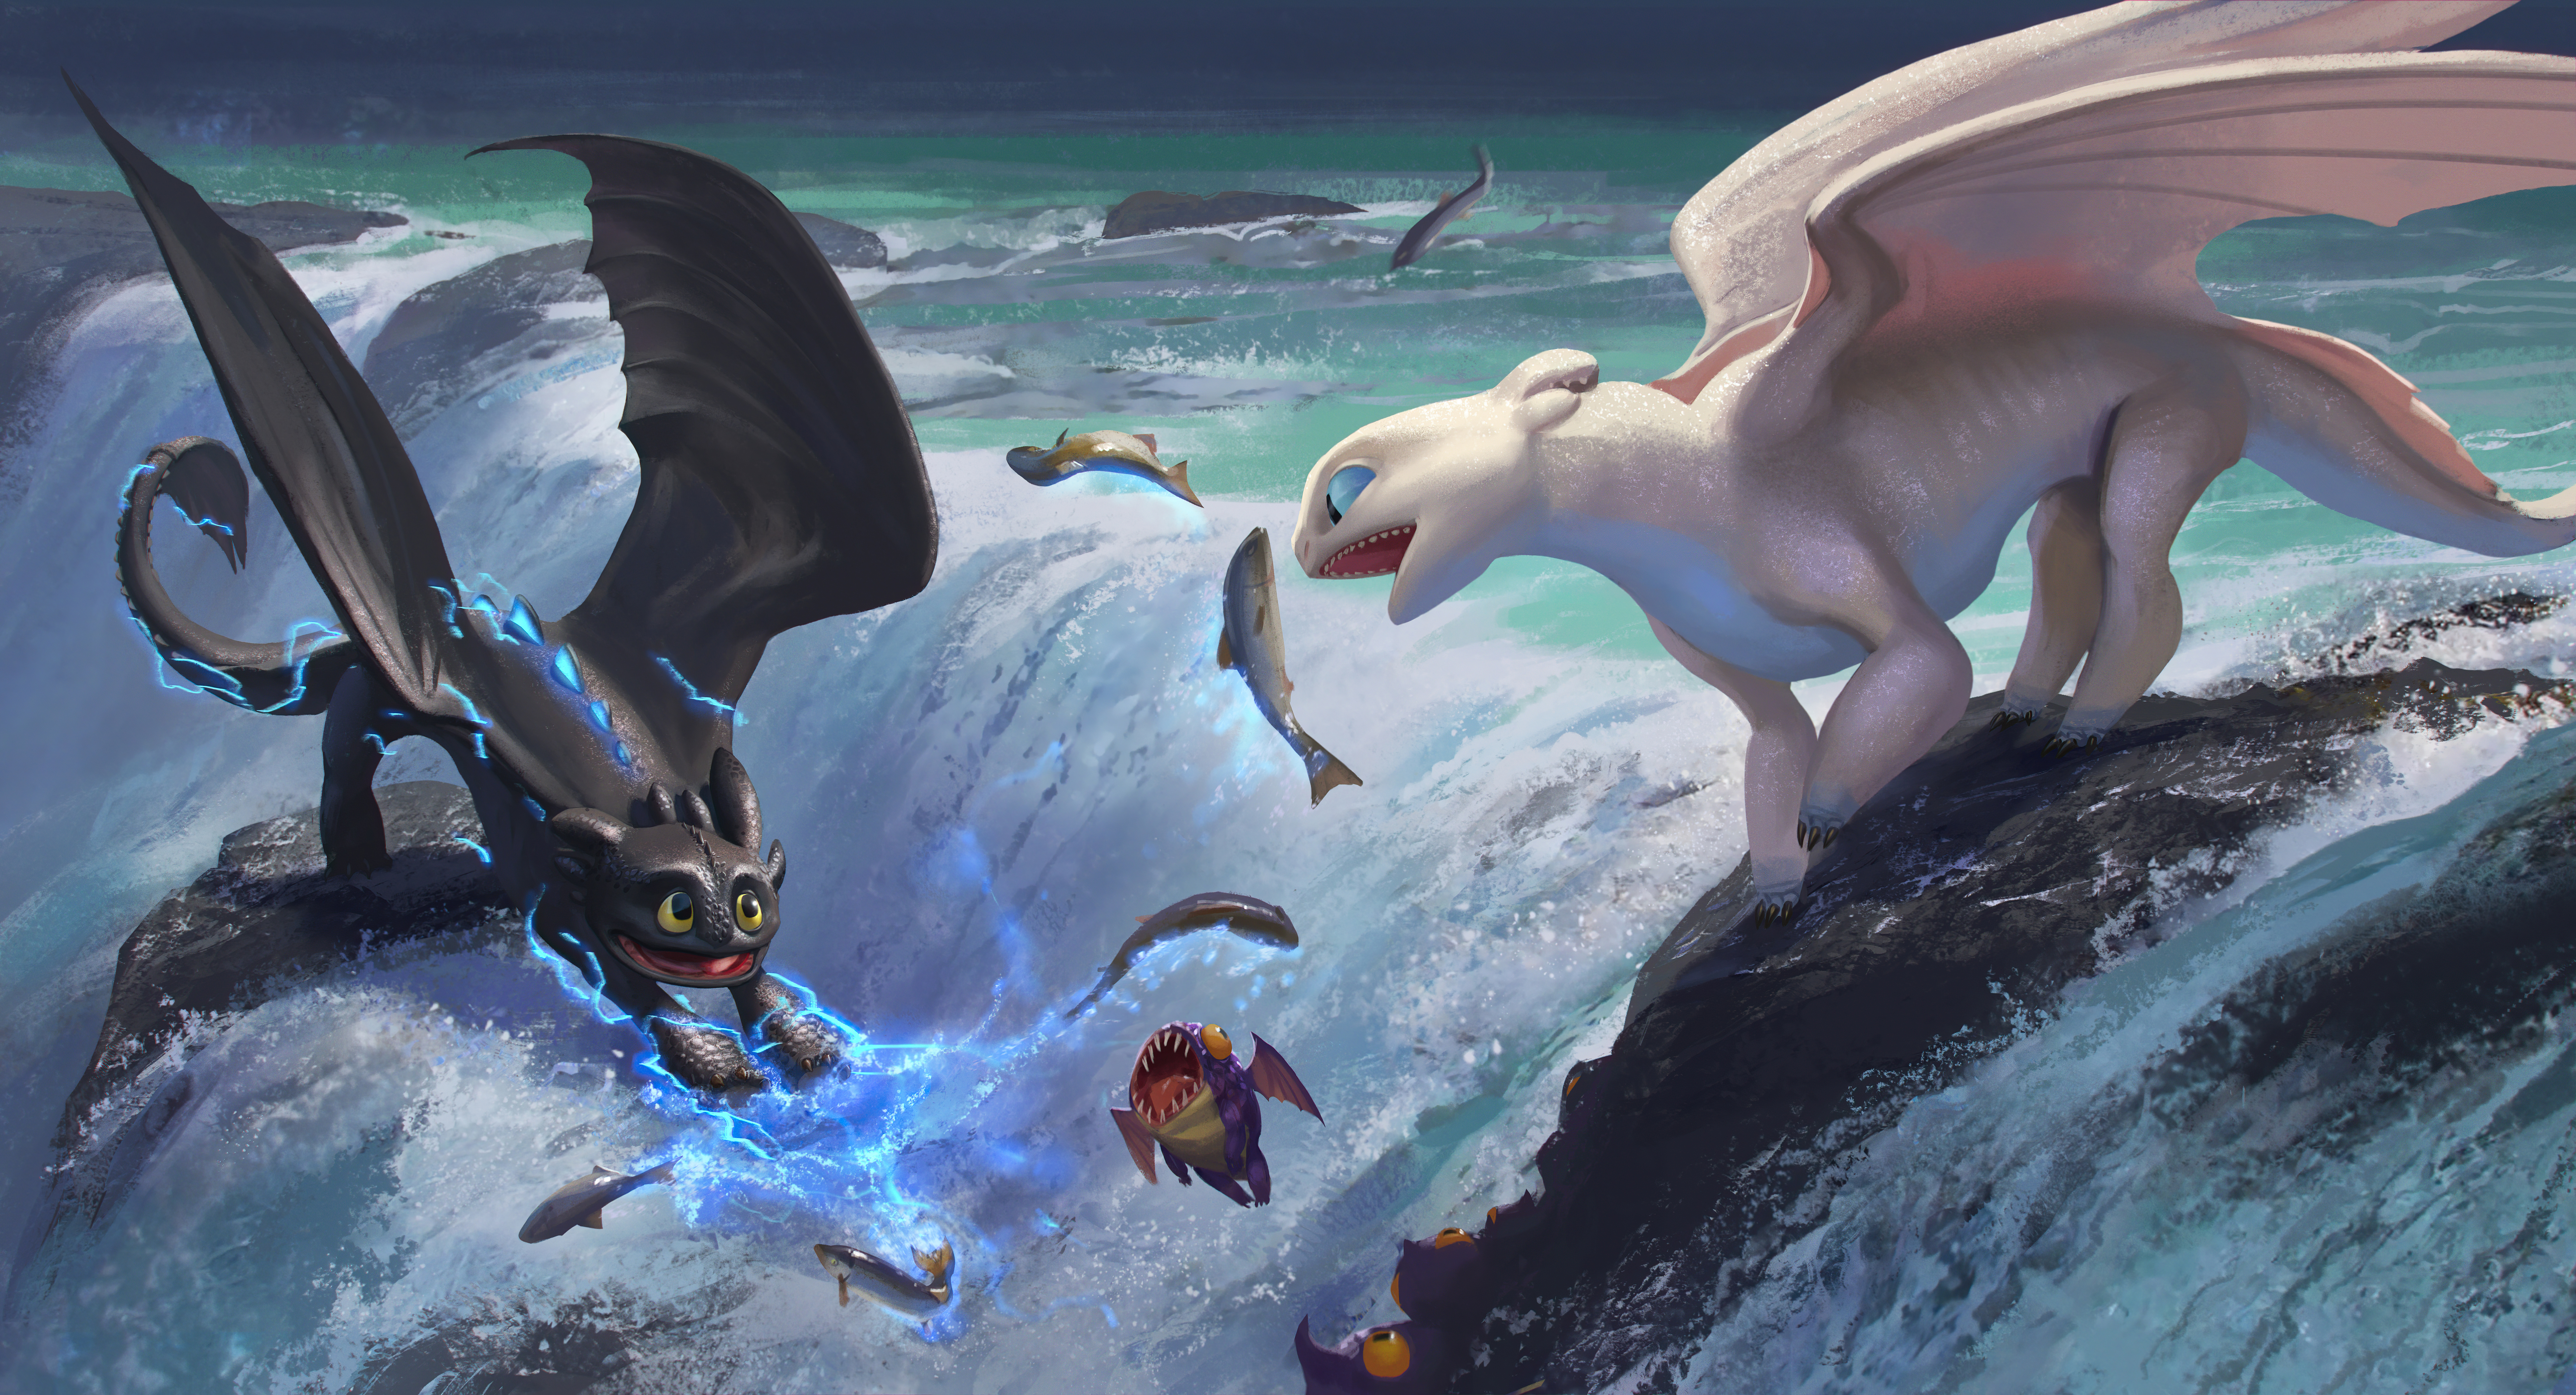 How to Train Your Dragon: The Hidden World 4k Ultra HD Wallpaper by Andrei-Pervukhin